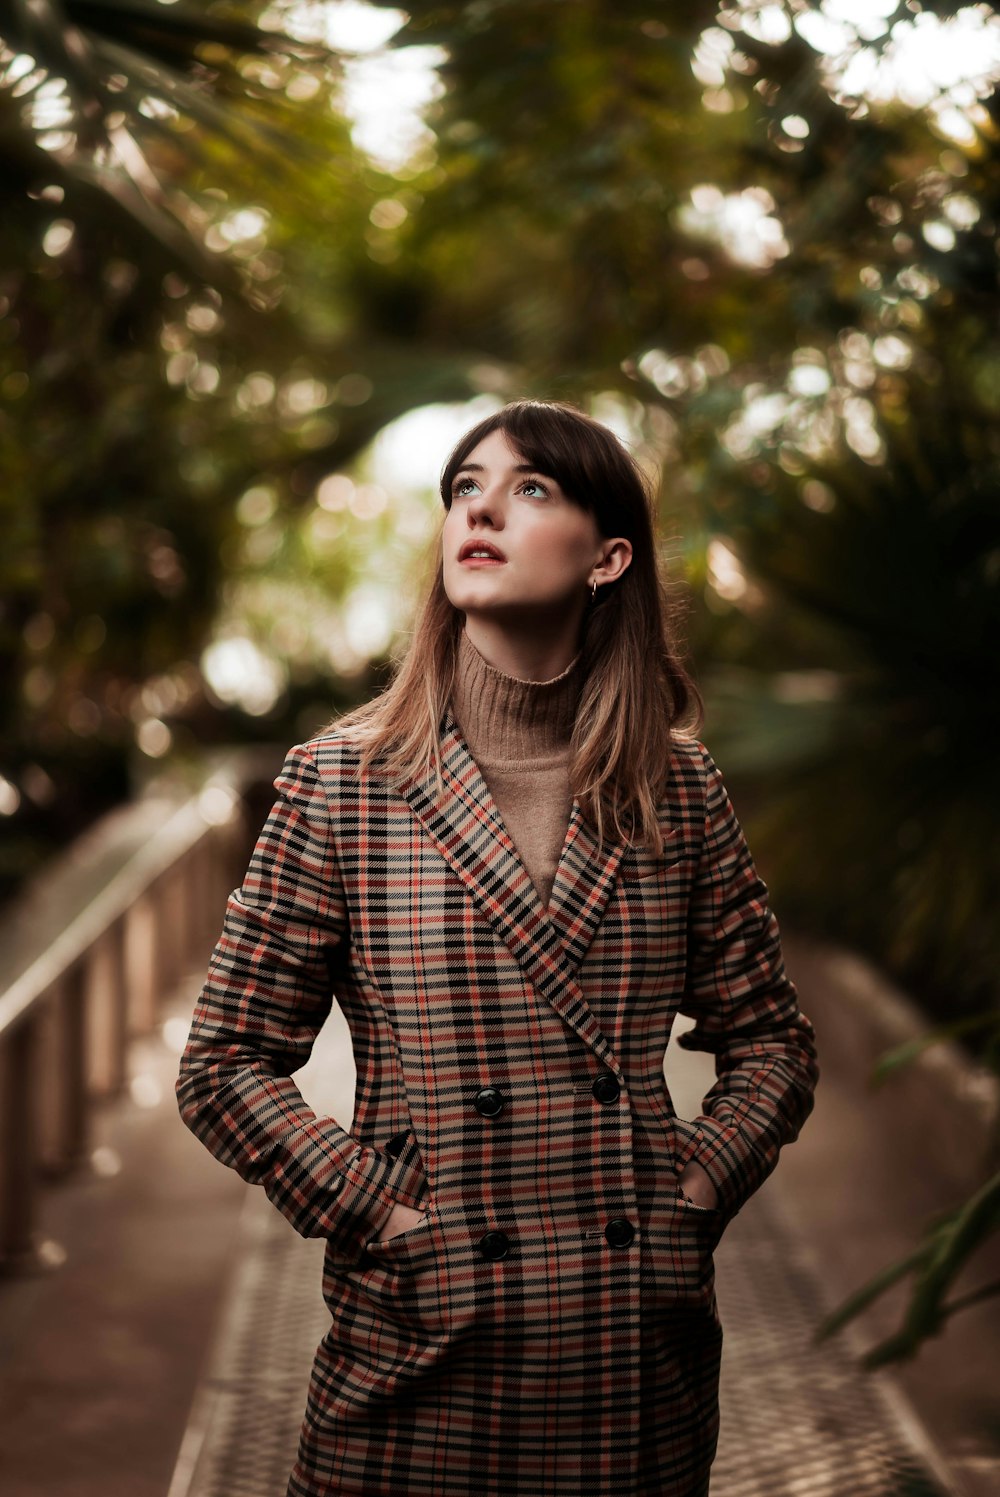 selective focus photography of woman wearing brown button-up coat looking upwards